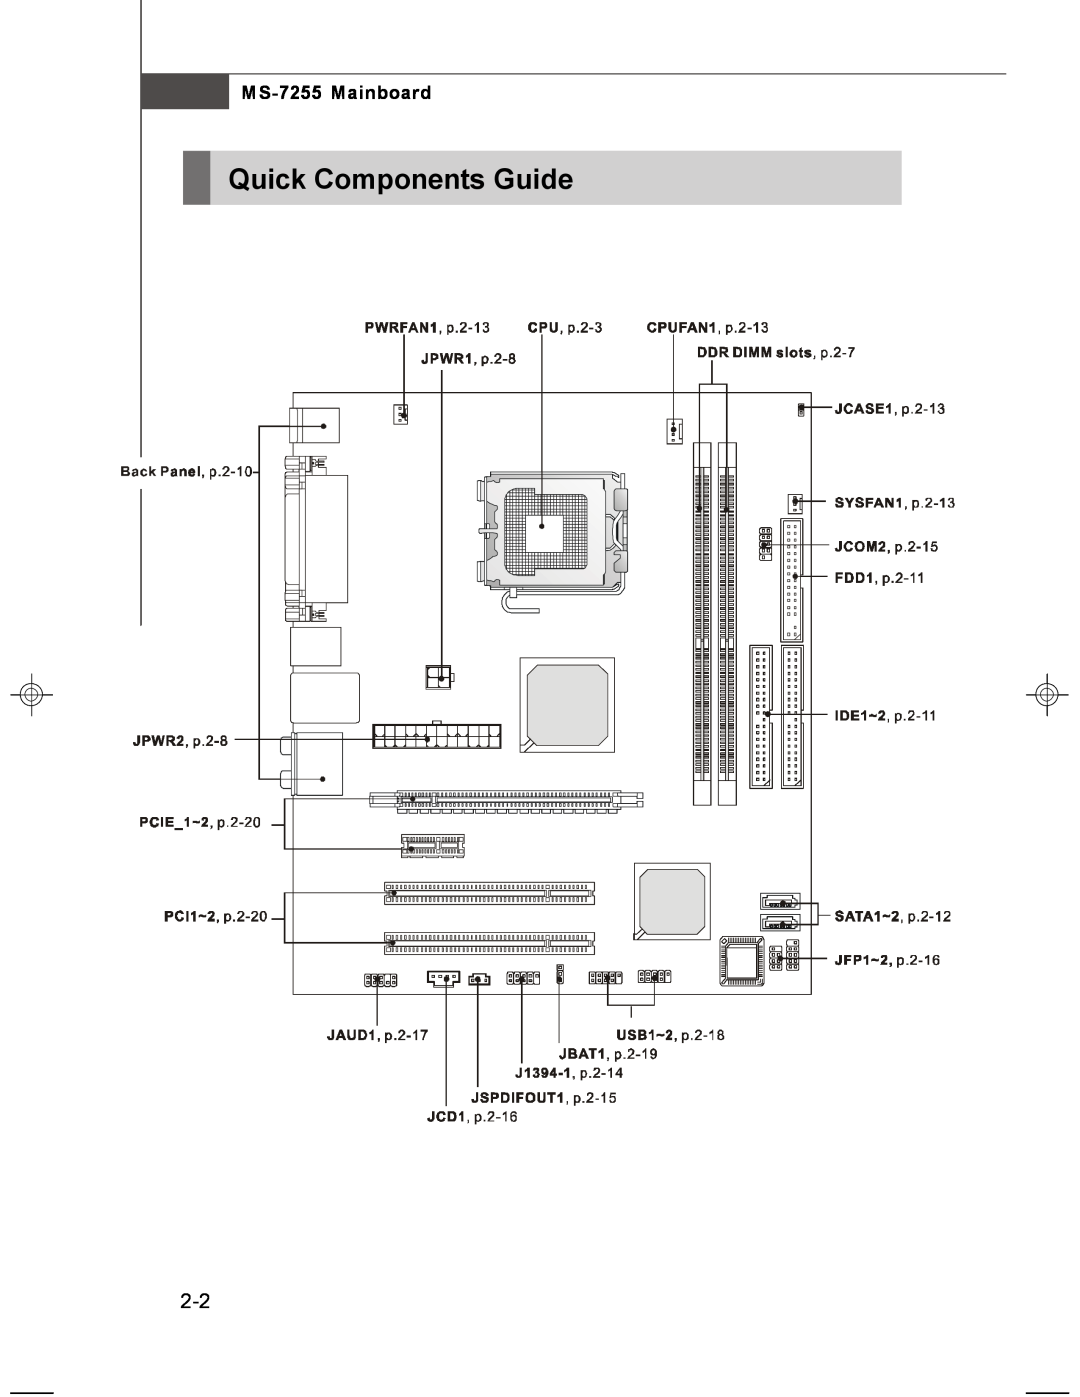 MSI manual Quick Components Guide, MS-7255 Mainboard 